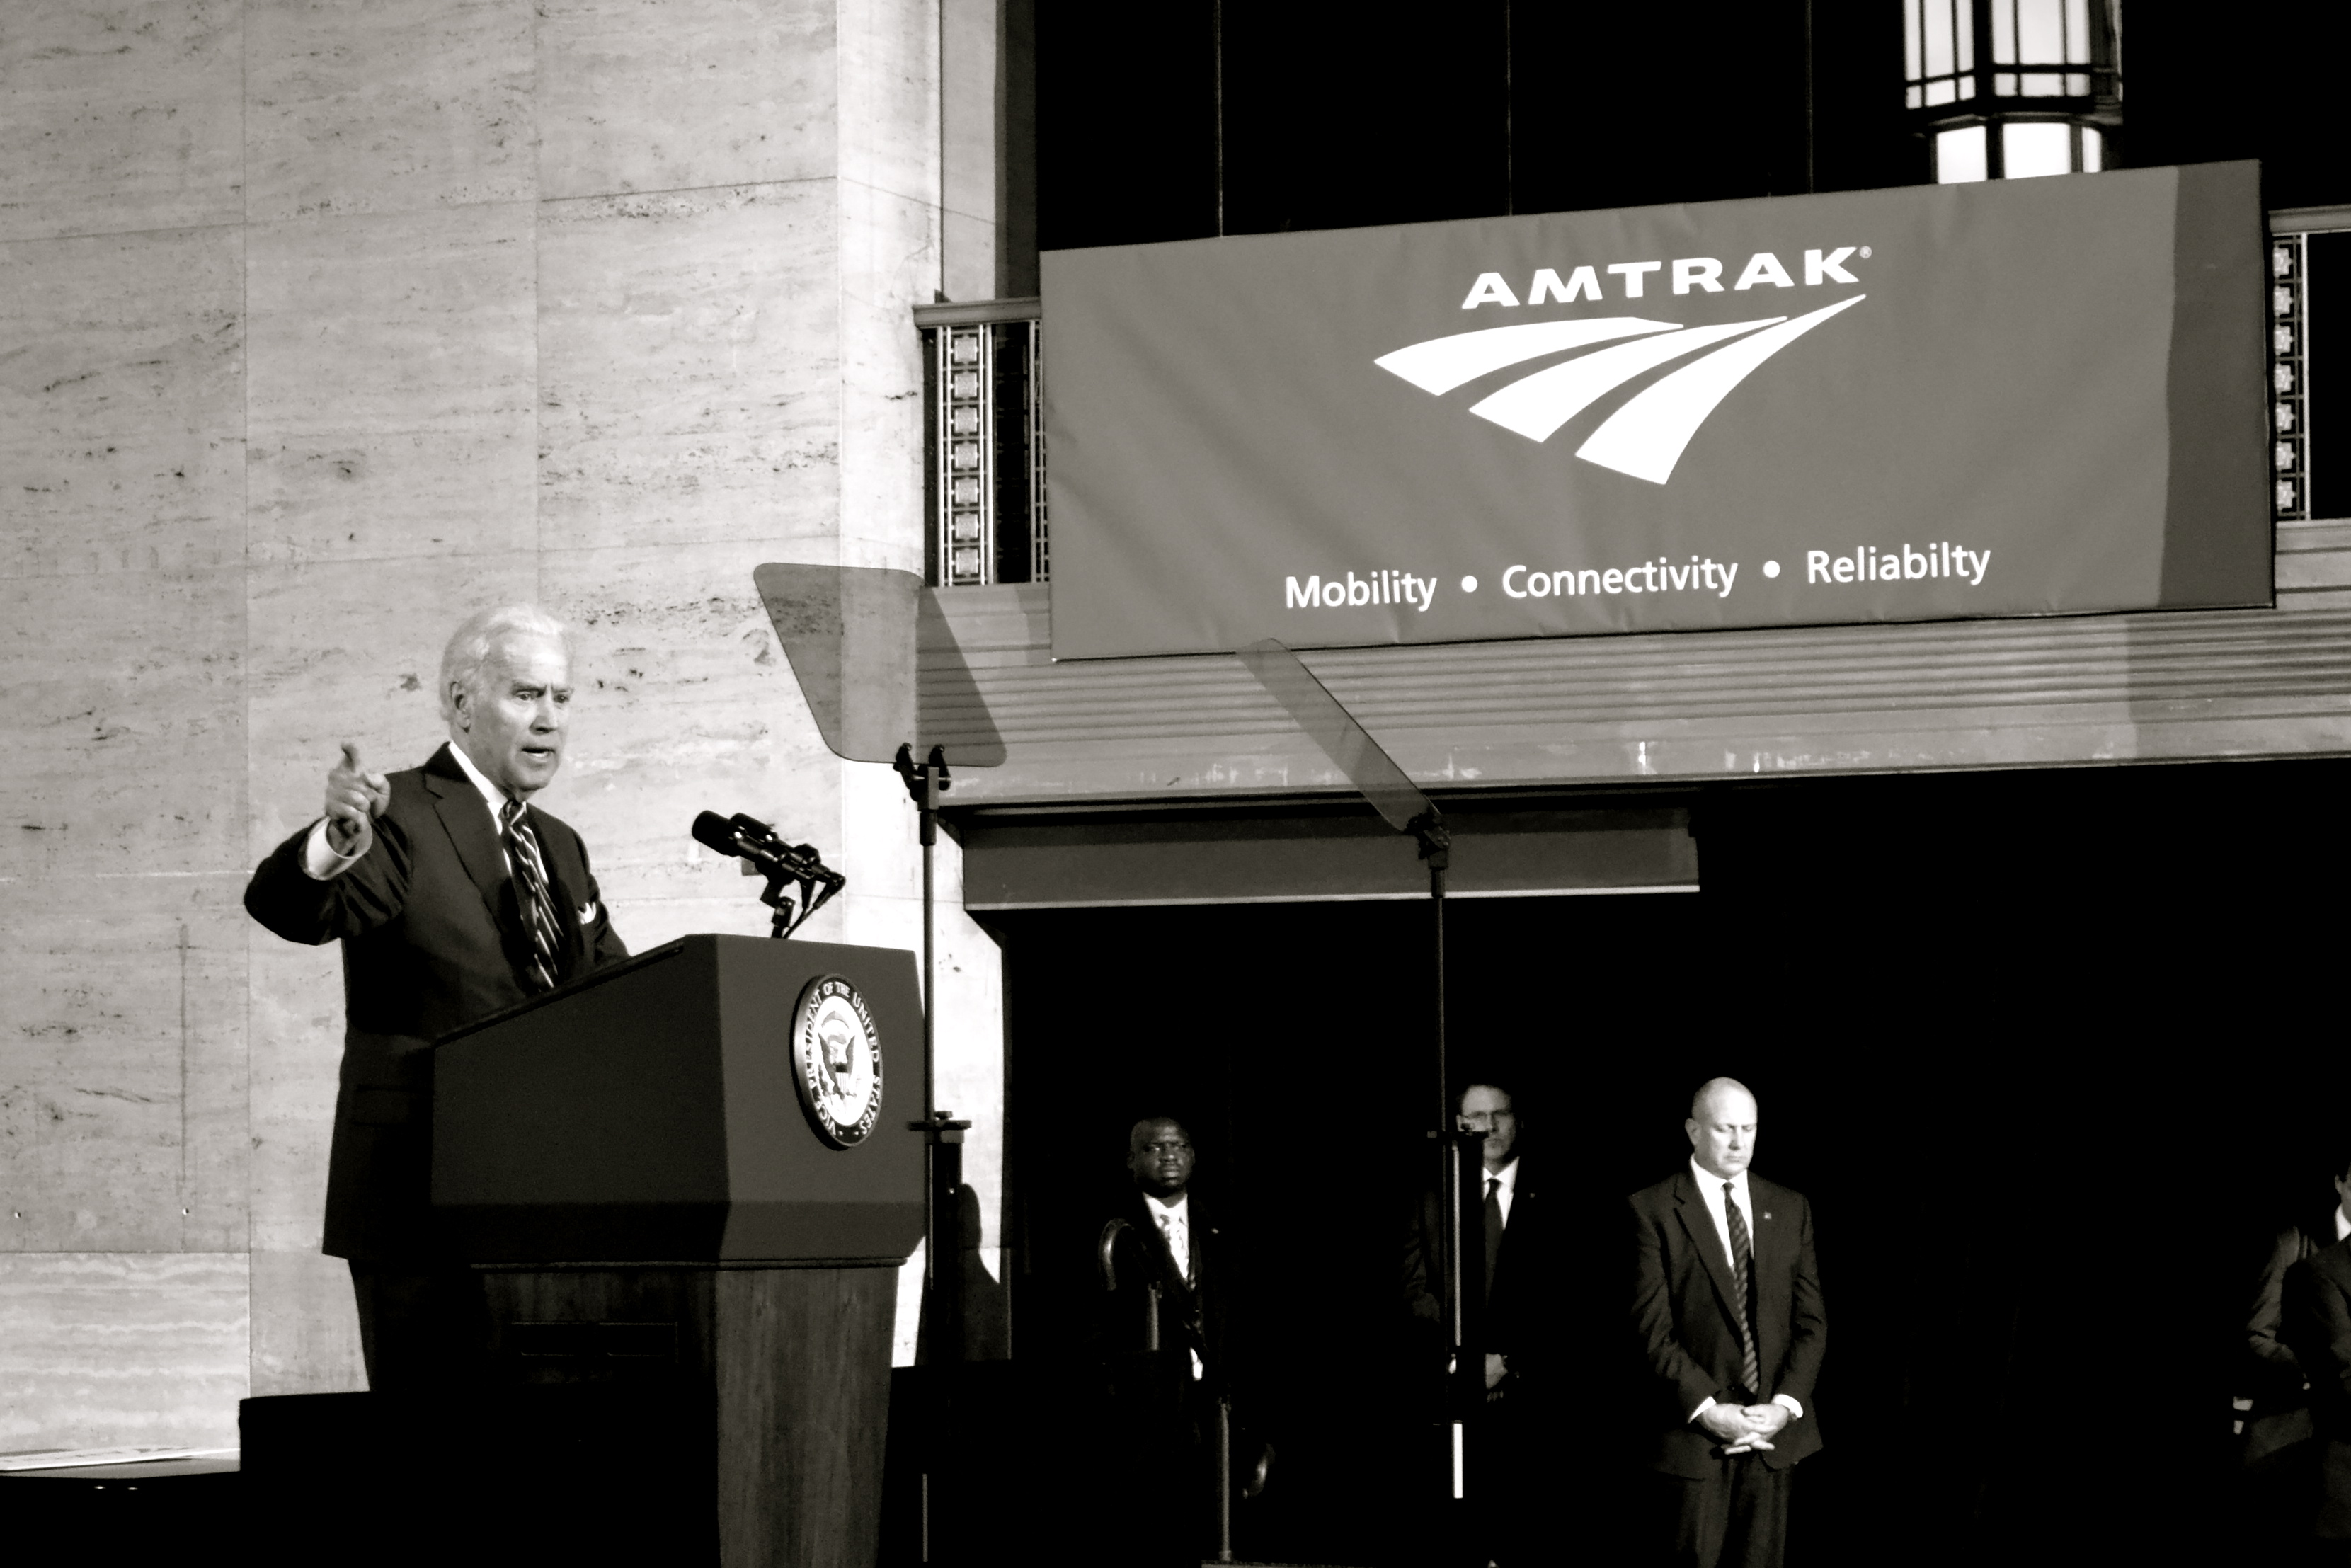 Biden spoke of the importance of investing in and modernizing rail at 30th Street Station